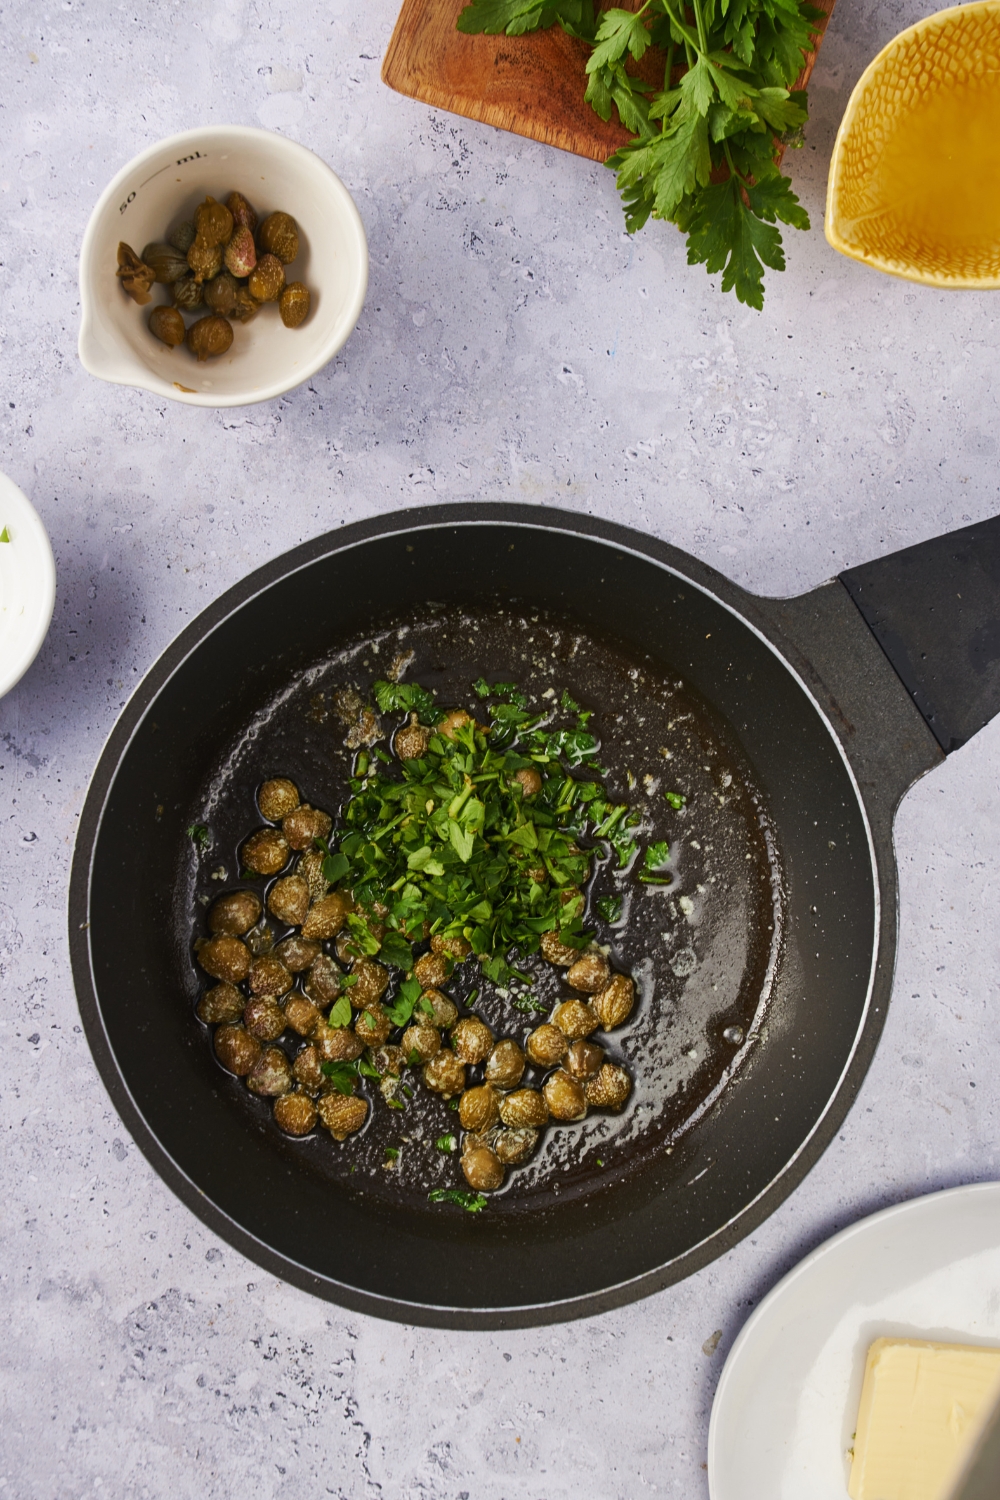 A black pot with capers and herbs cooking in oil.